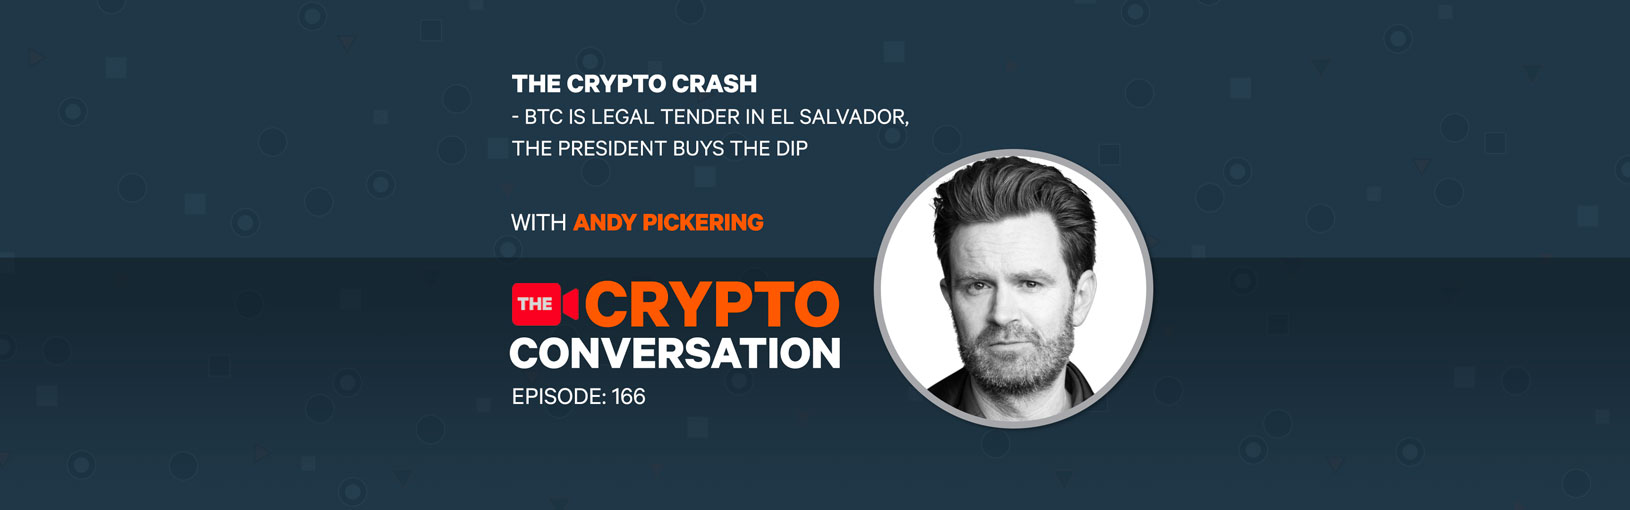 The Crypto Crash – BTC is legal tender in El Salvador, the President buys the dip